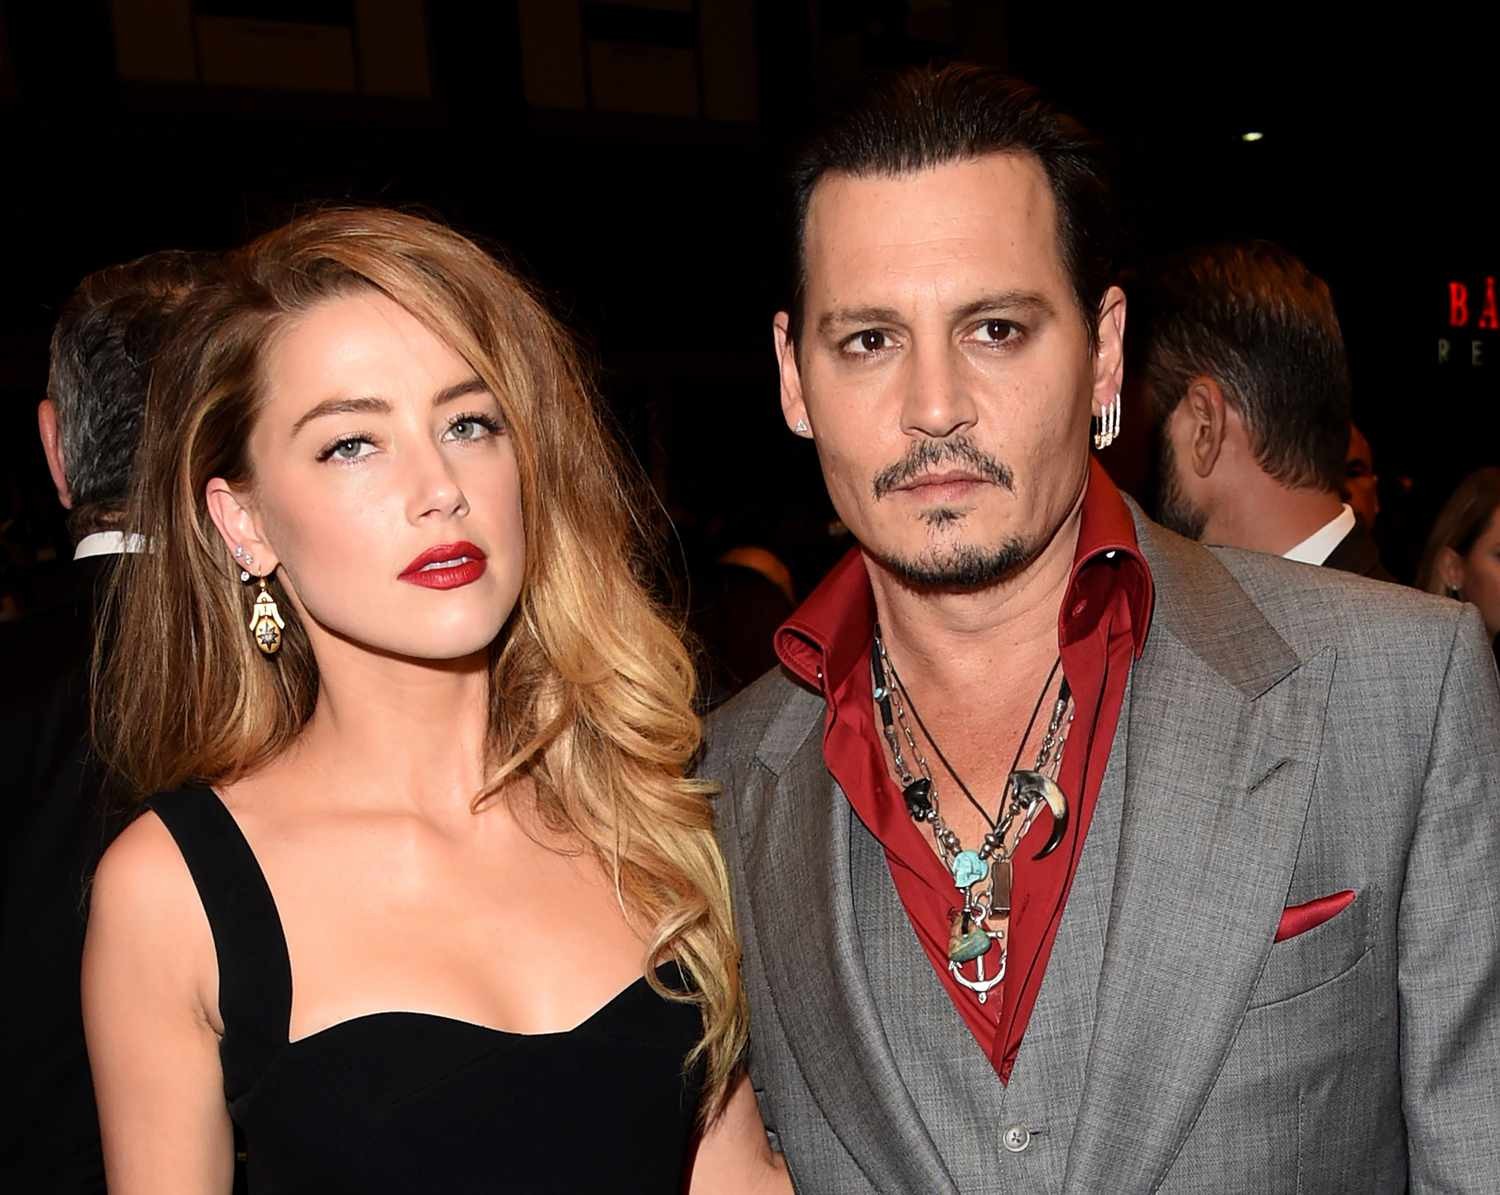 Johnny Depp and Amber Heard's career are shattered post trial.